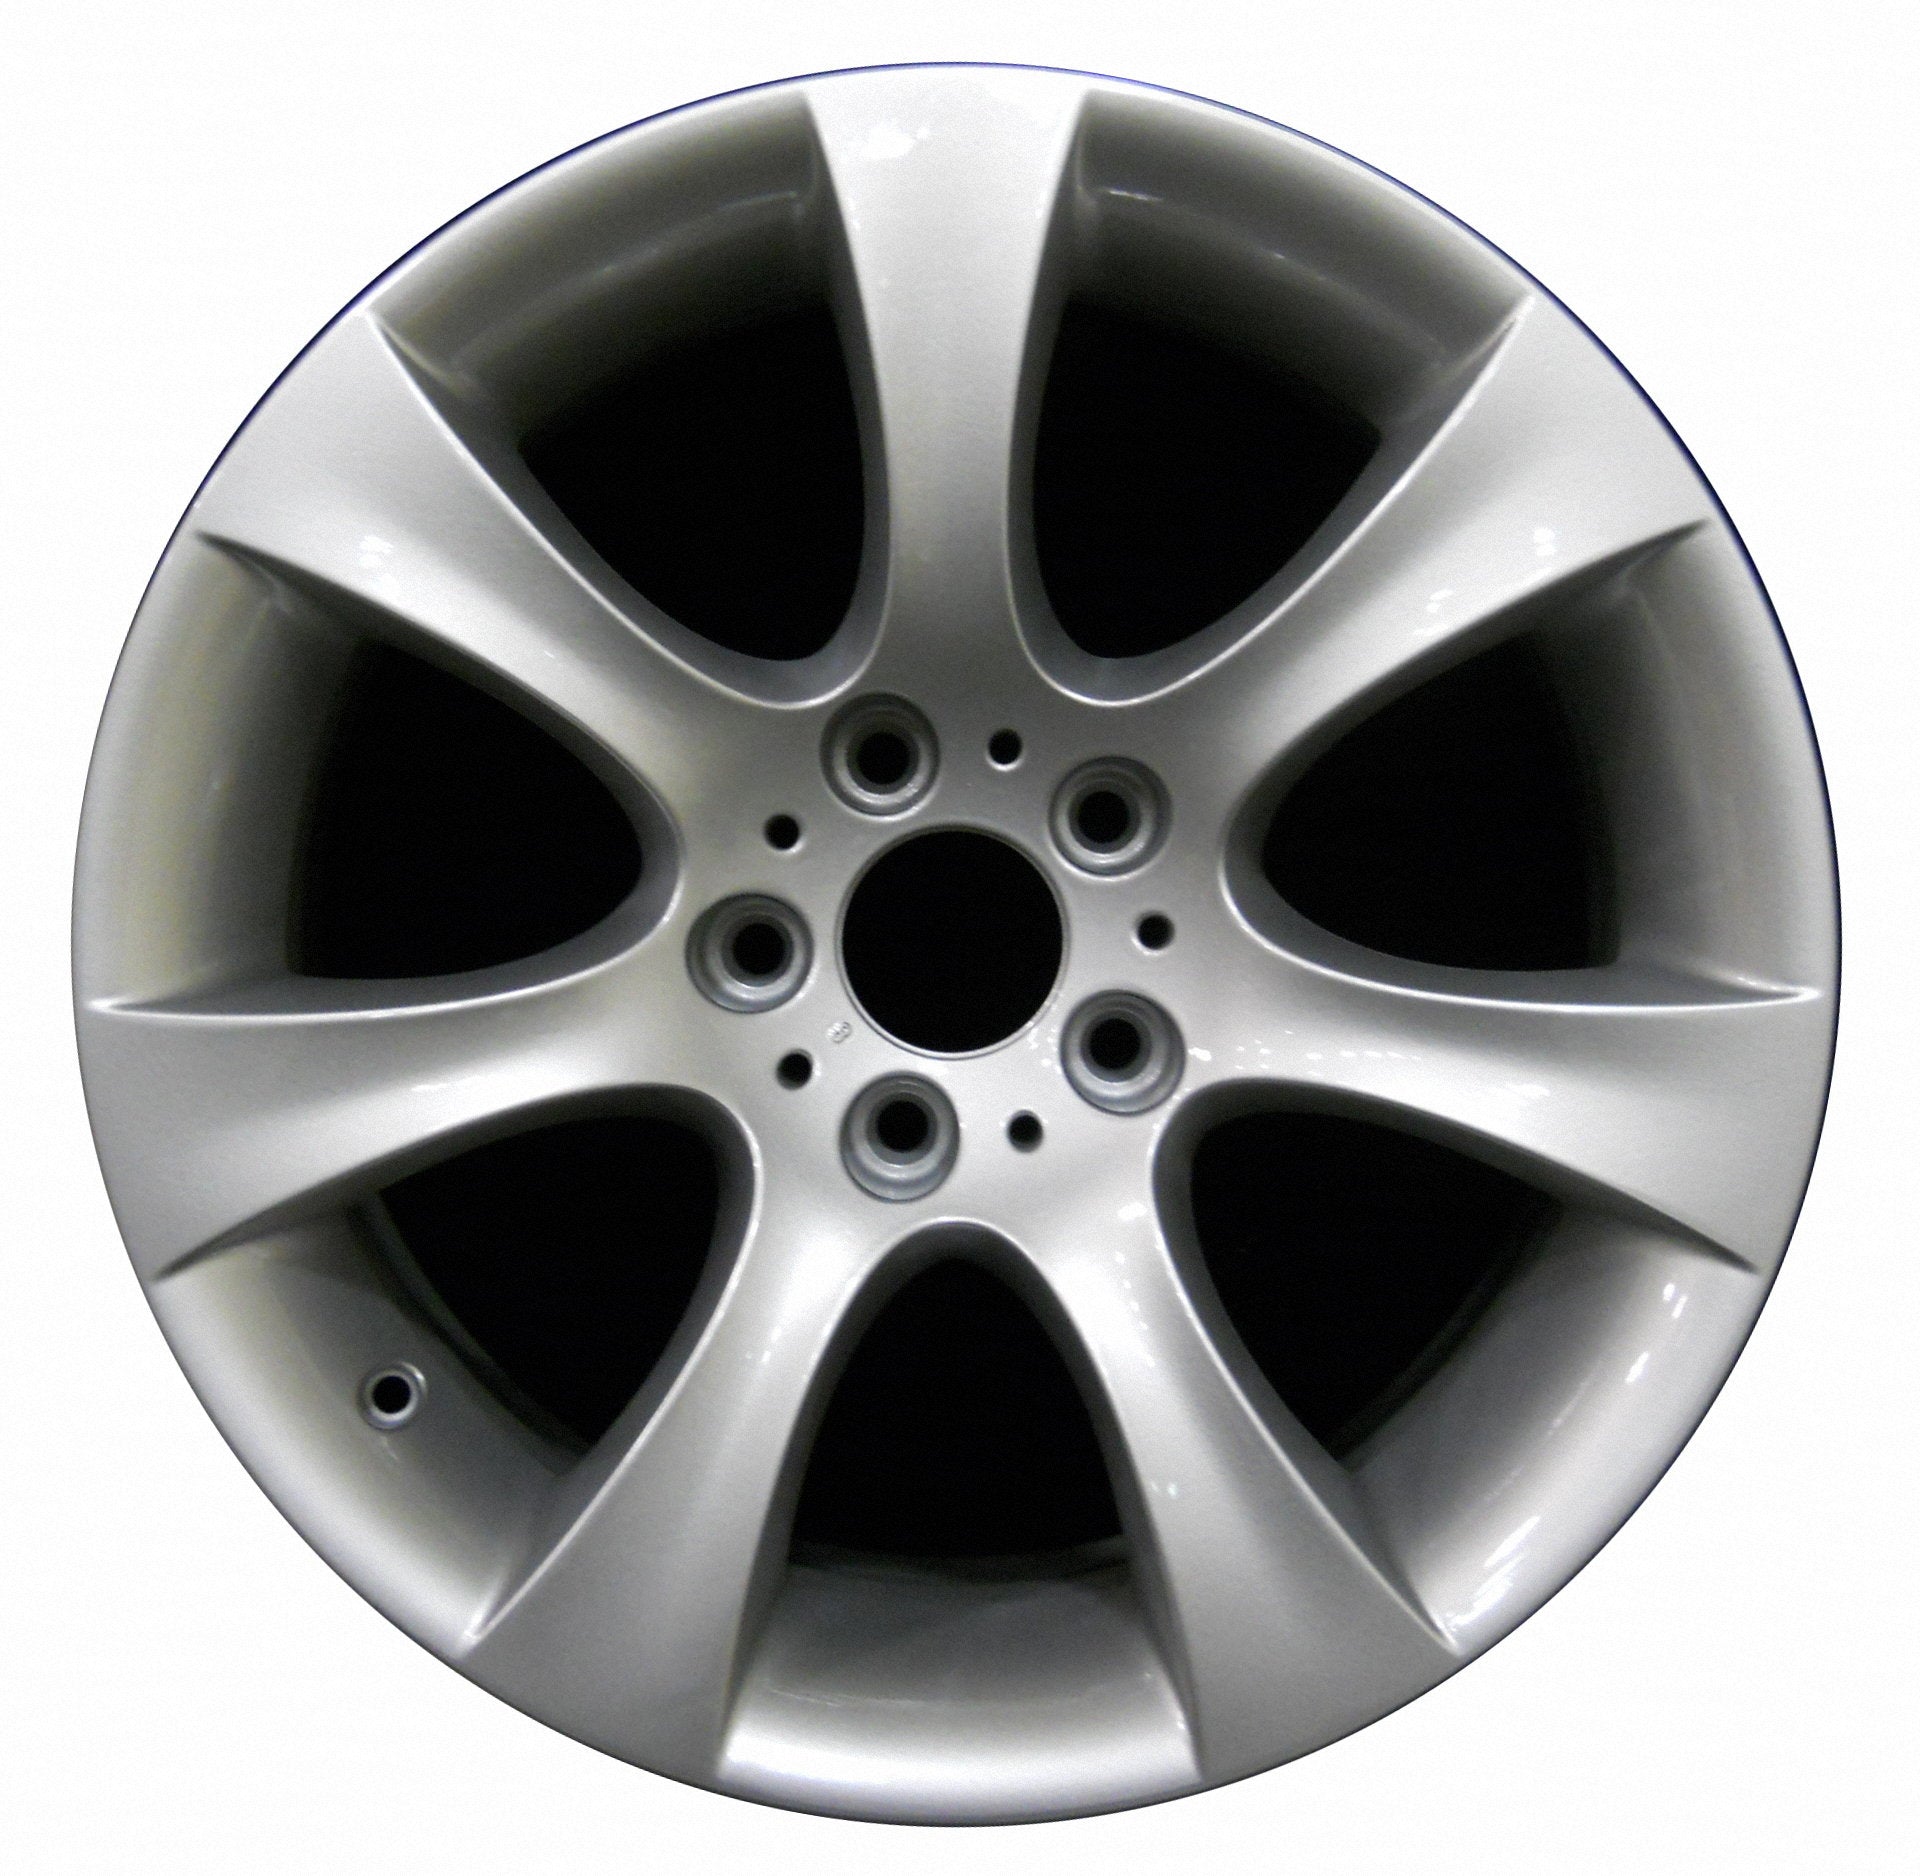 BMW 530i  2004, 2005, 2006, 2007 Factory OEM Car Wheel Size 18x8 Alloy WAO.59475FT.PS06.FF